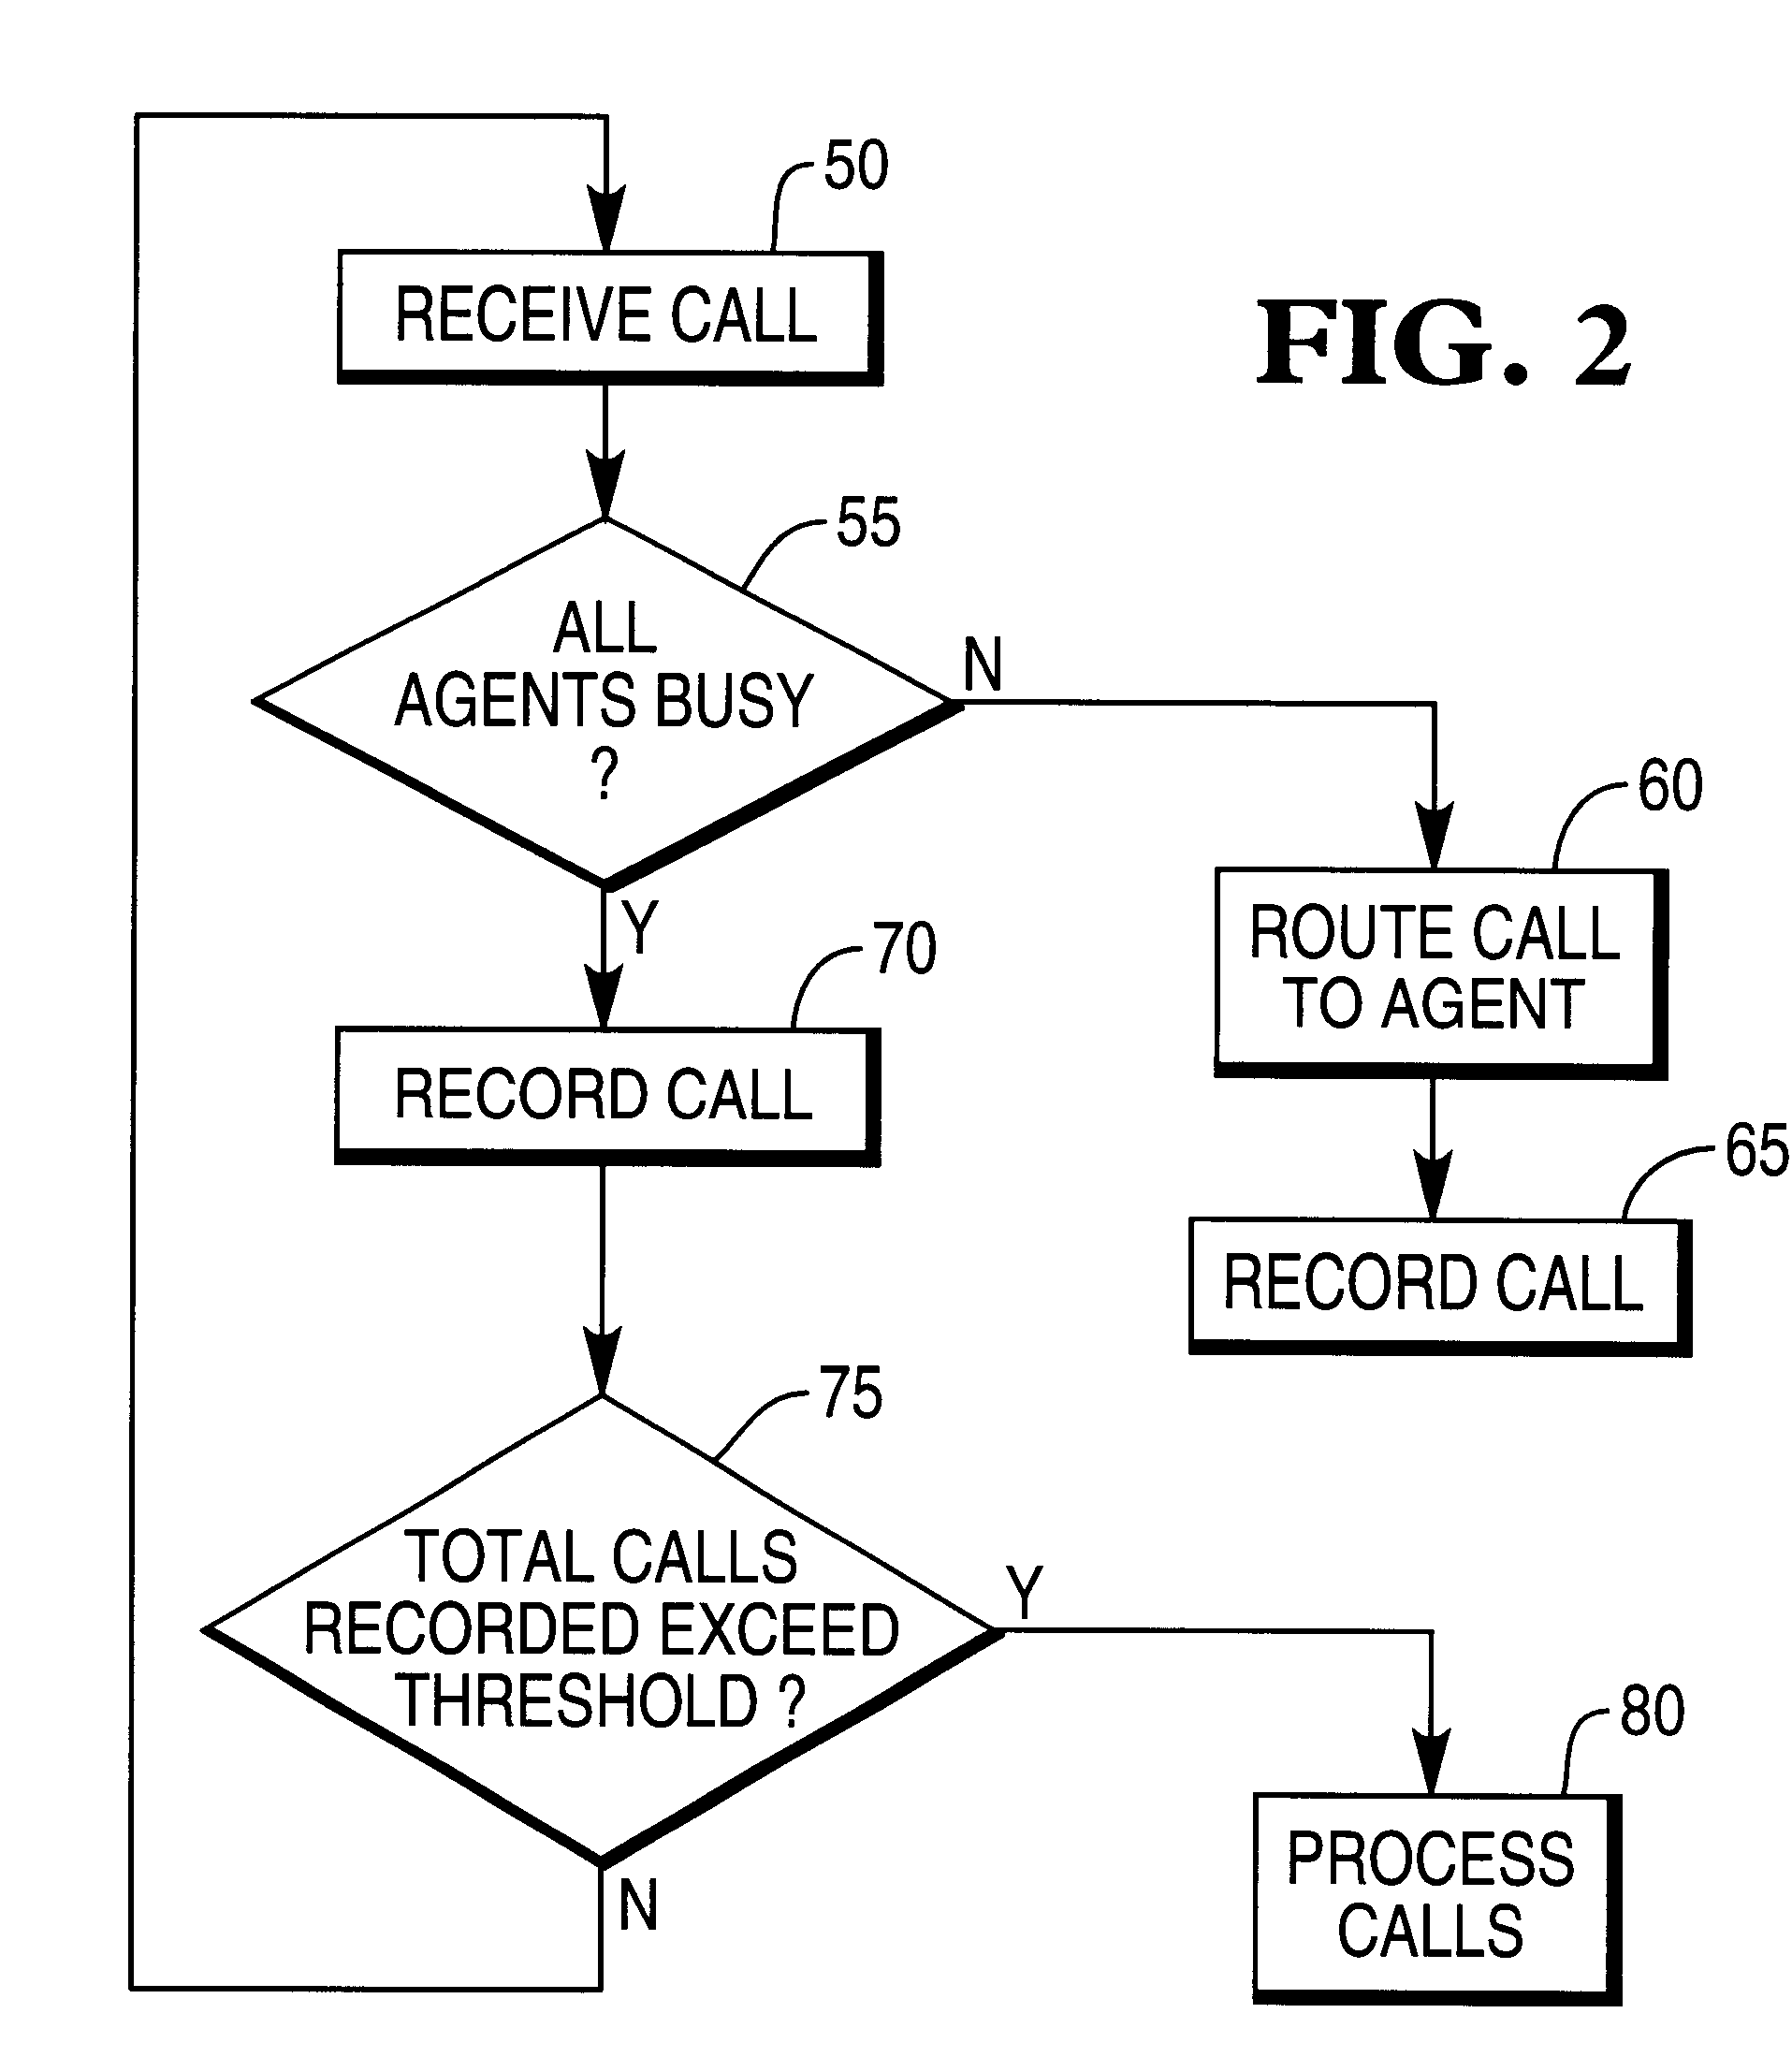 Call distribution system inferring mental or physiological state